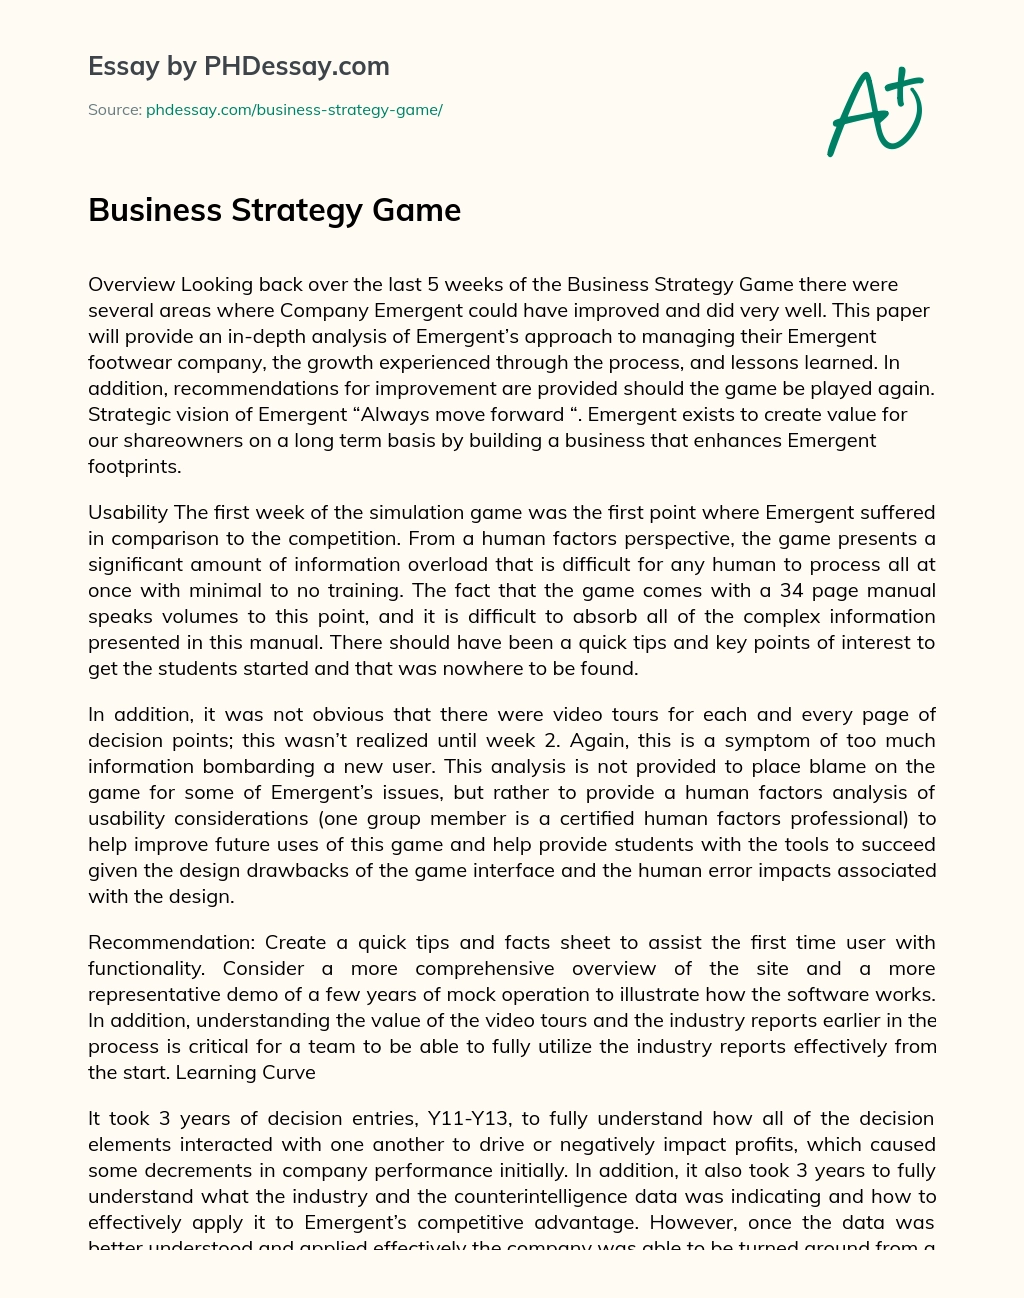 Business Strategy Game essay